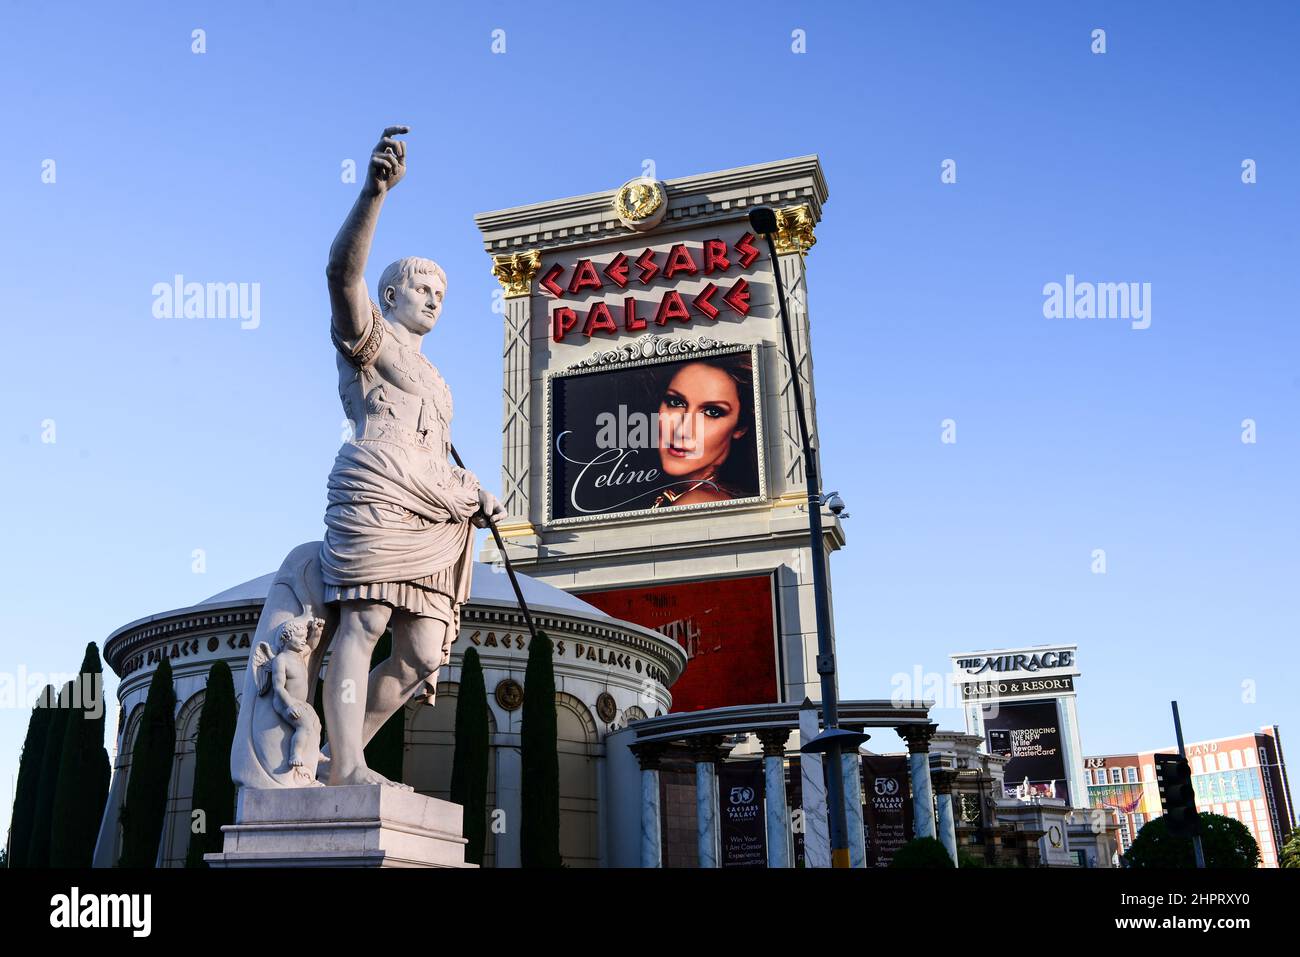 Caesars Palace statue gets decked out in Golden Knights gear